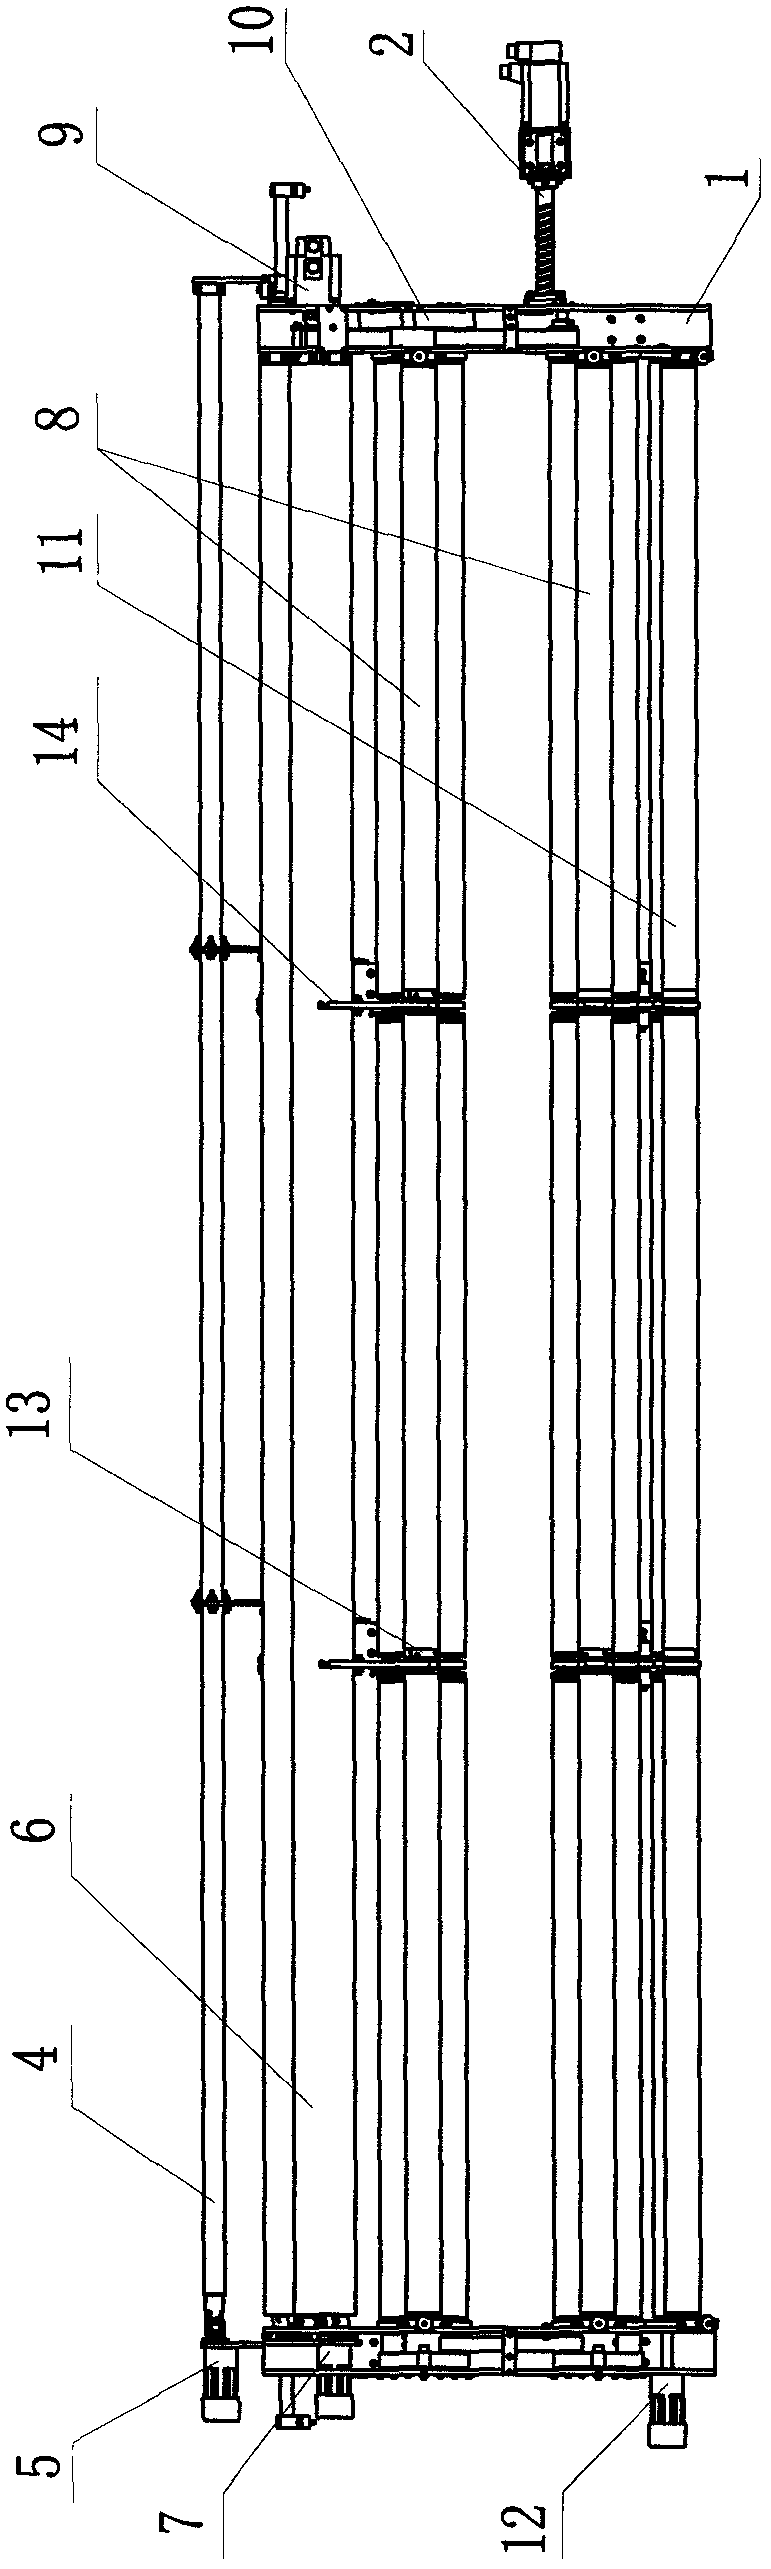 Roller drive mechanism of quilting and embroidering machine allowing multiple pieces of cloth to be connected